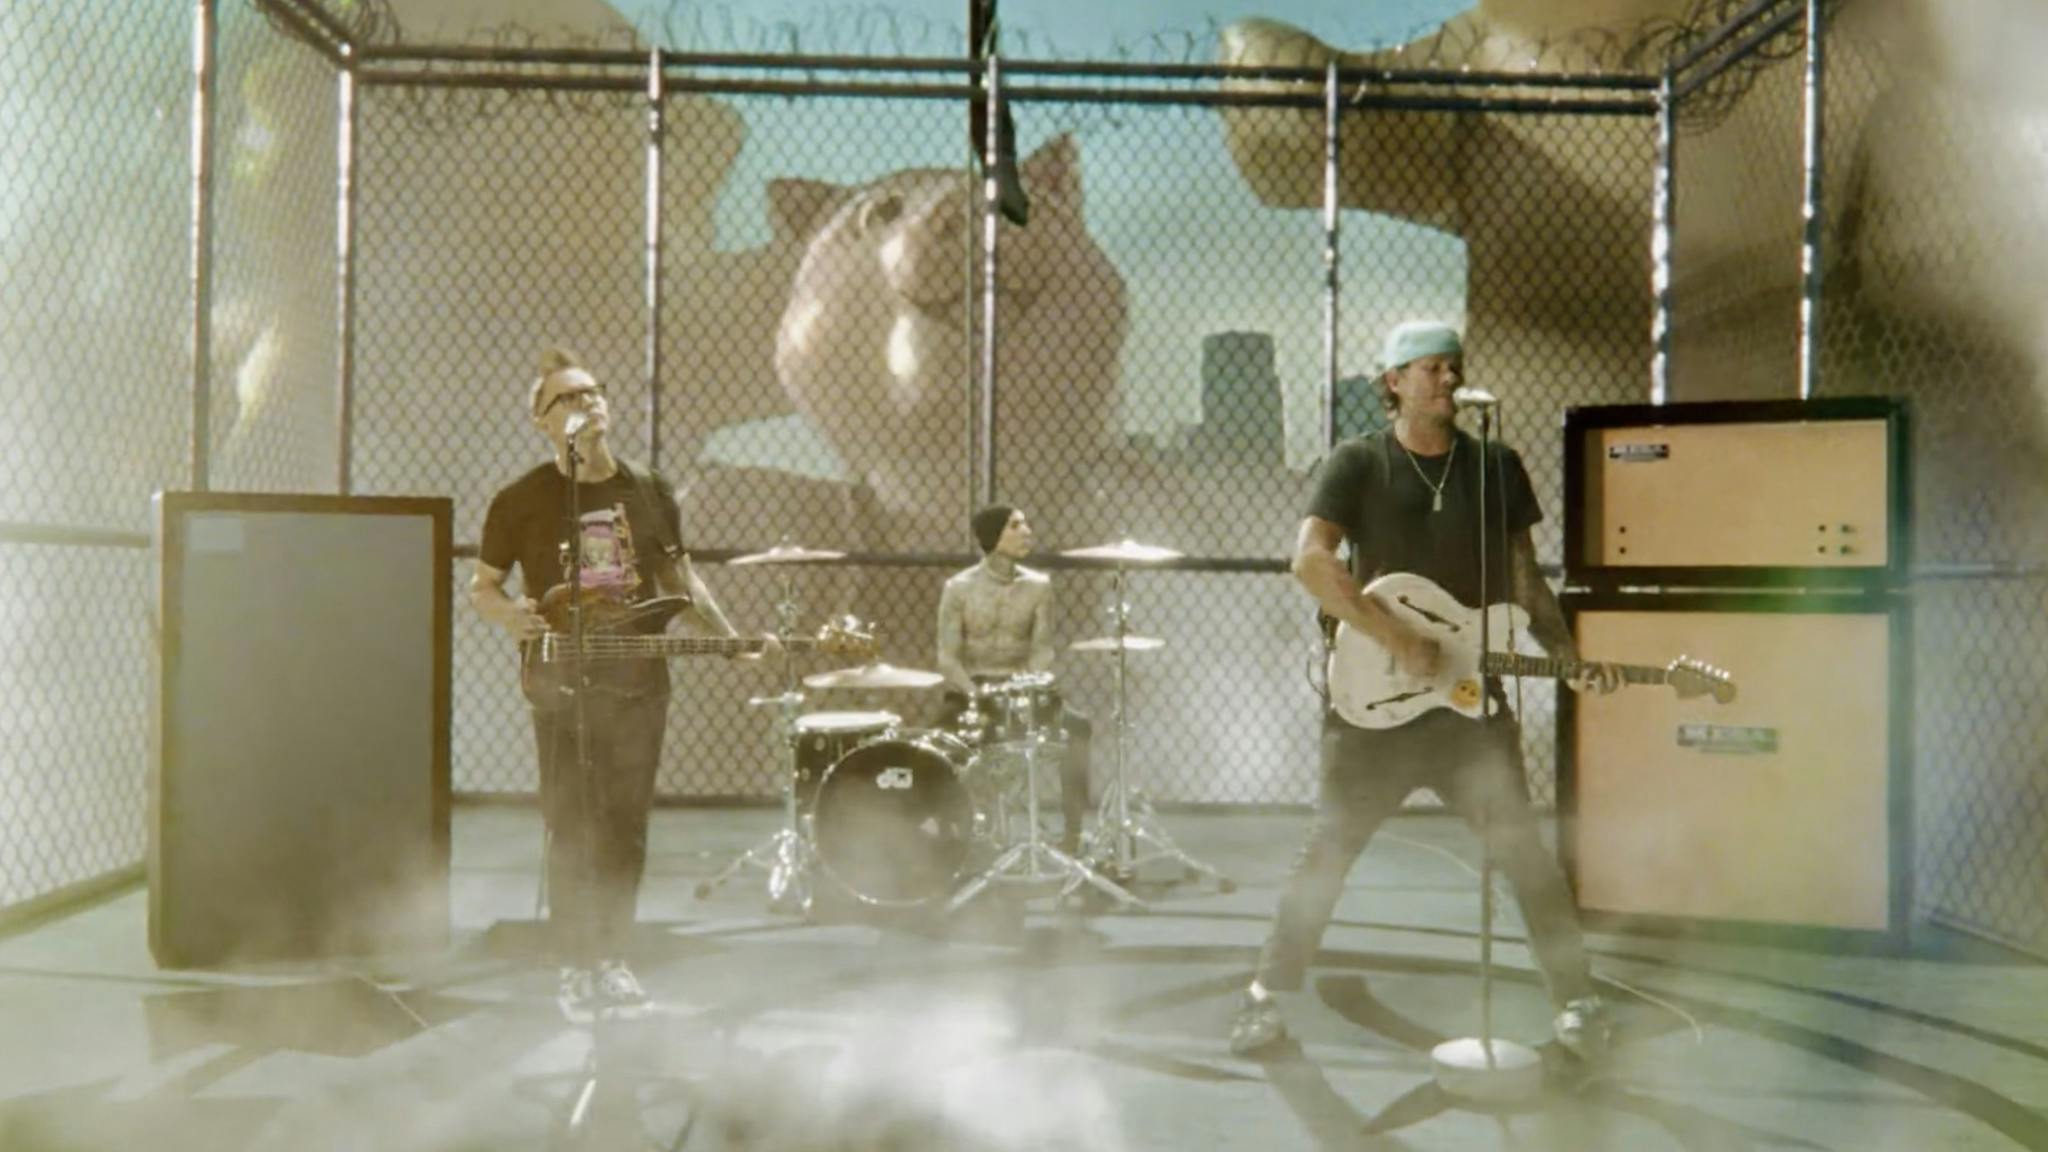 blink-182 drop heartfelt new single and video, ONE MORE TIME